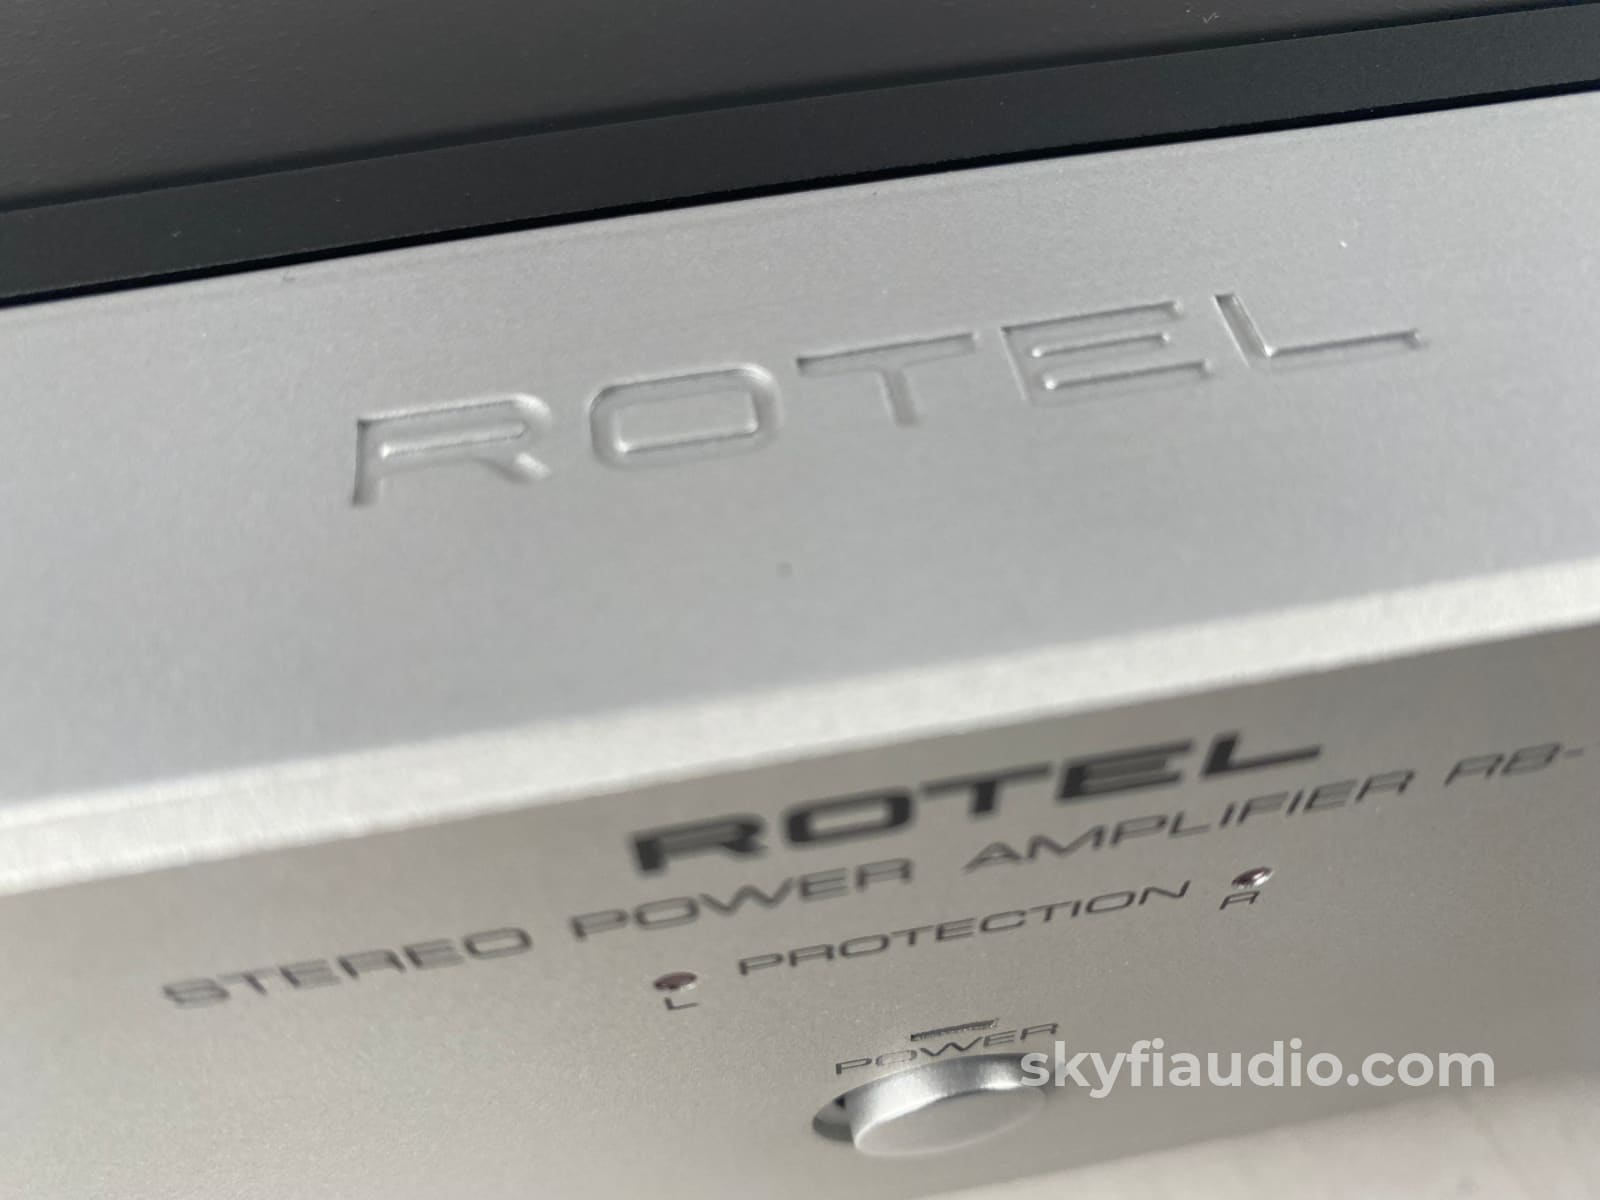 Rotel Rb-1092 Stereo Amplifier Fully Tested 500 Watts Rms @ 8 Ohms